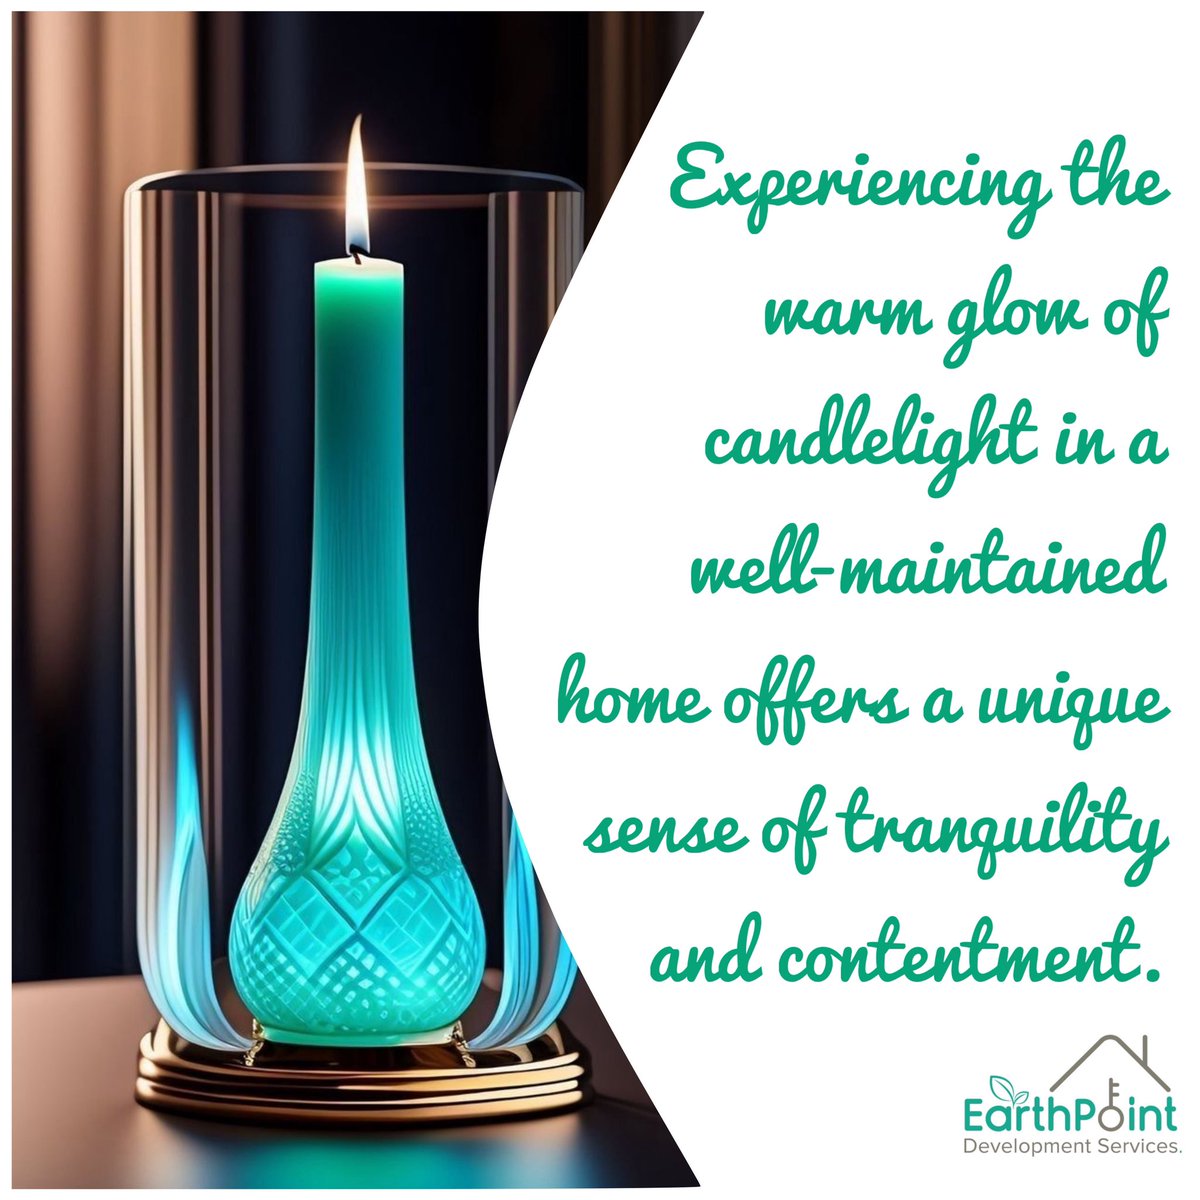 Experiencing the warm glow of candlelight in a well-maintained home offers a unique sense of tranquility and contentment✌️ #Abuja #Kano #RealEstate #Building #Terrace #Duplex #BlockOfFlats #AffordableHomes #LuxuryHouse #Development #Nigeria